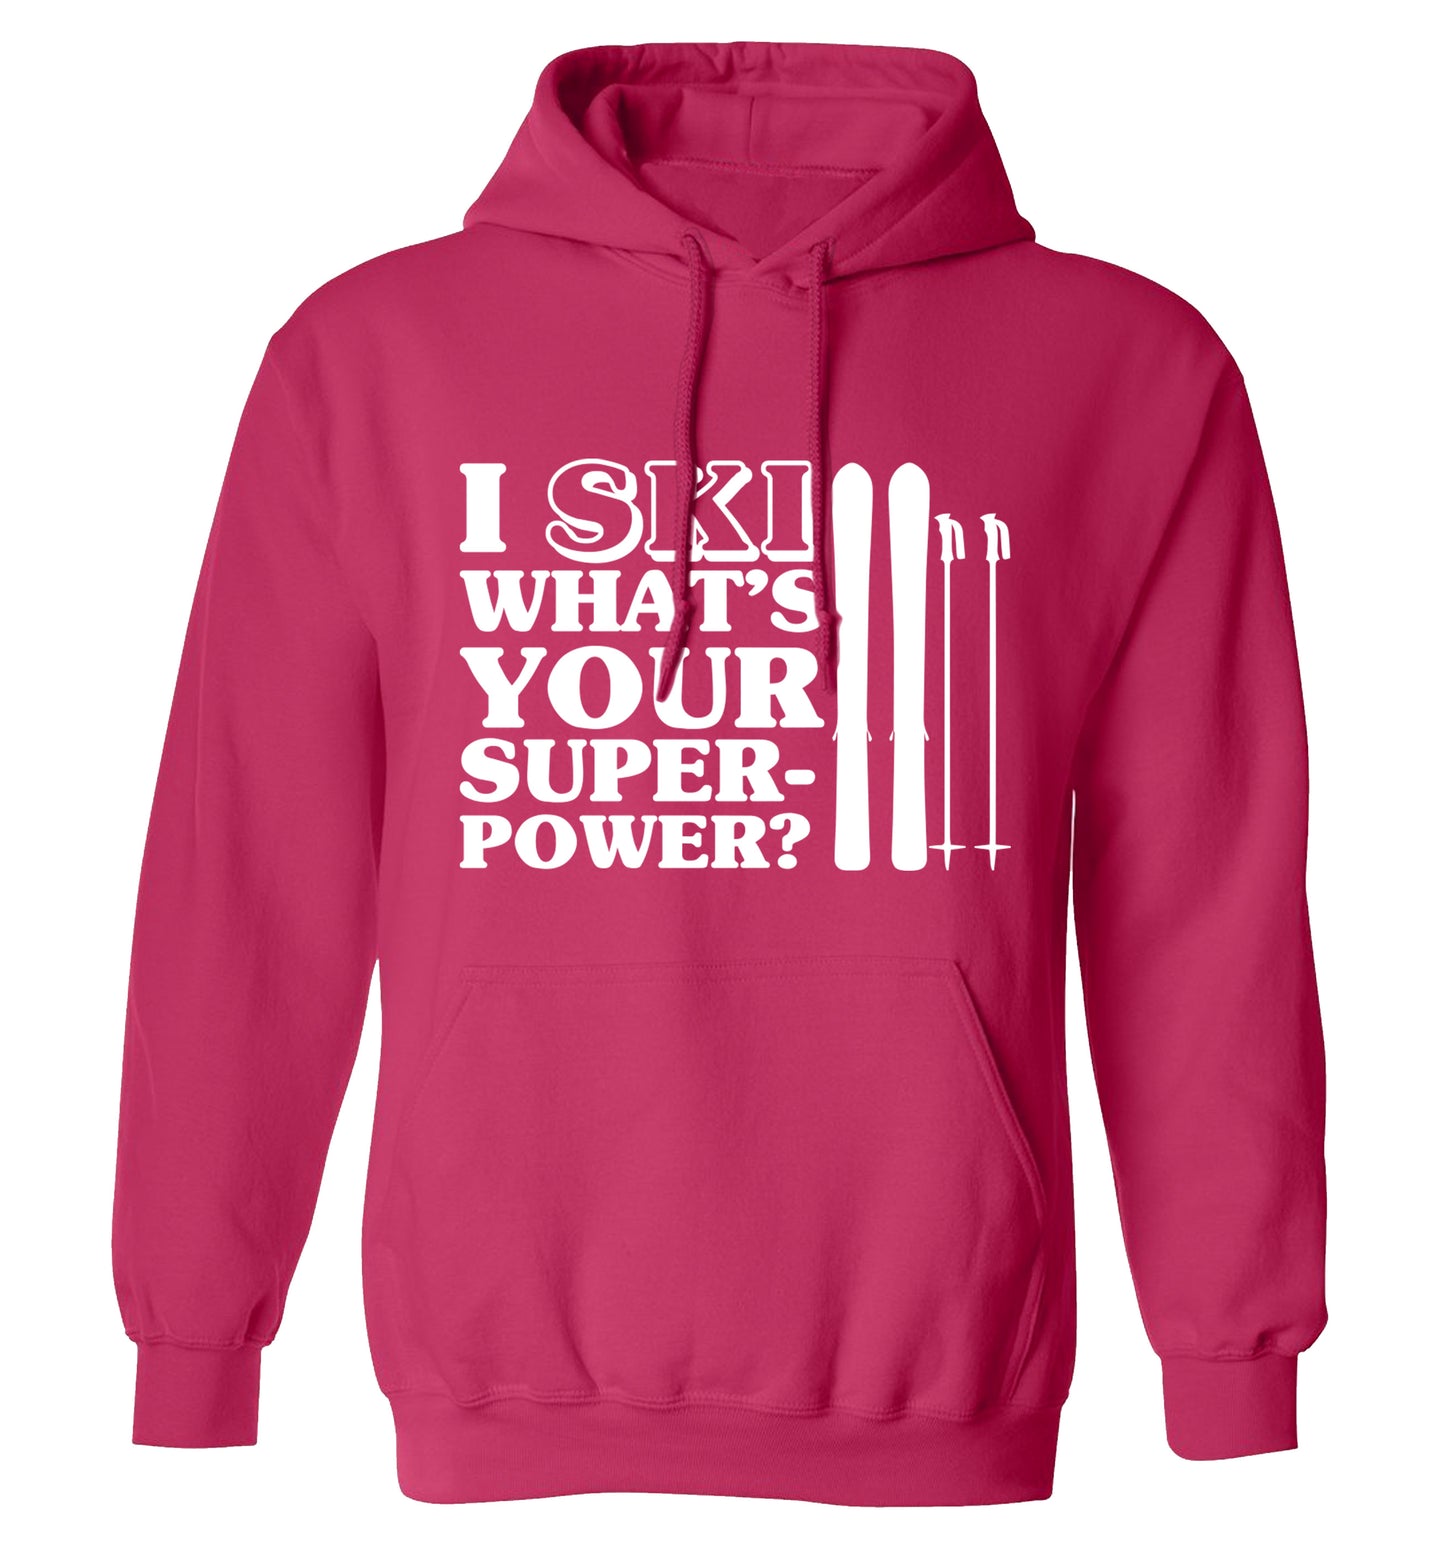 I ski what's your superpower? adults unisexpink hoodie 2XL